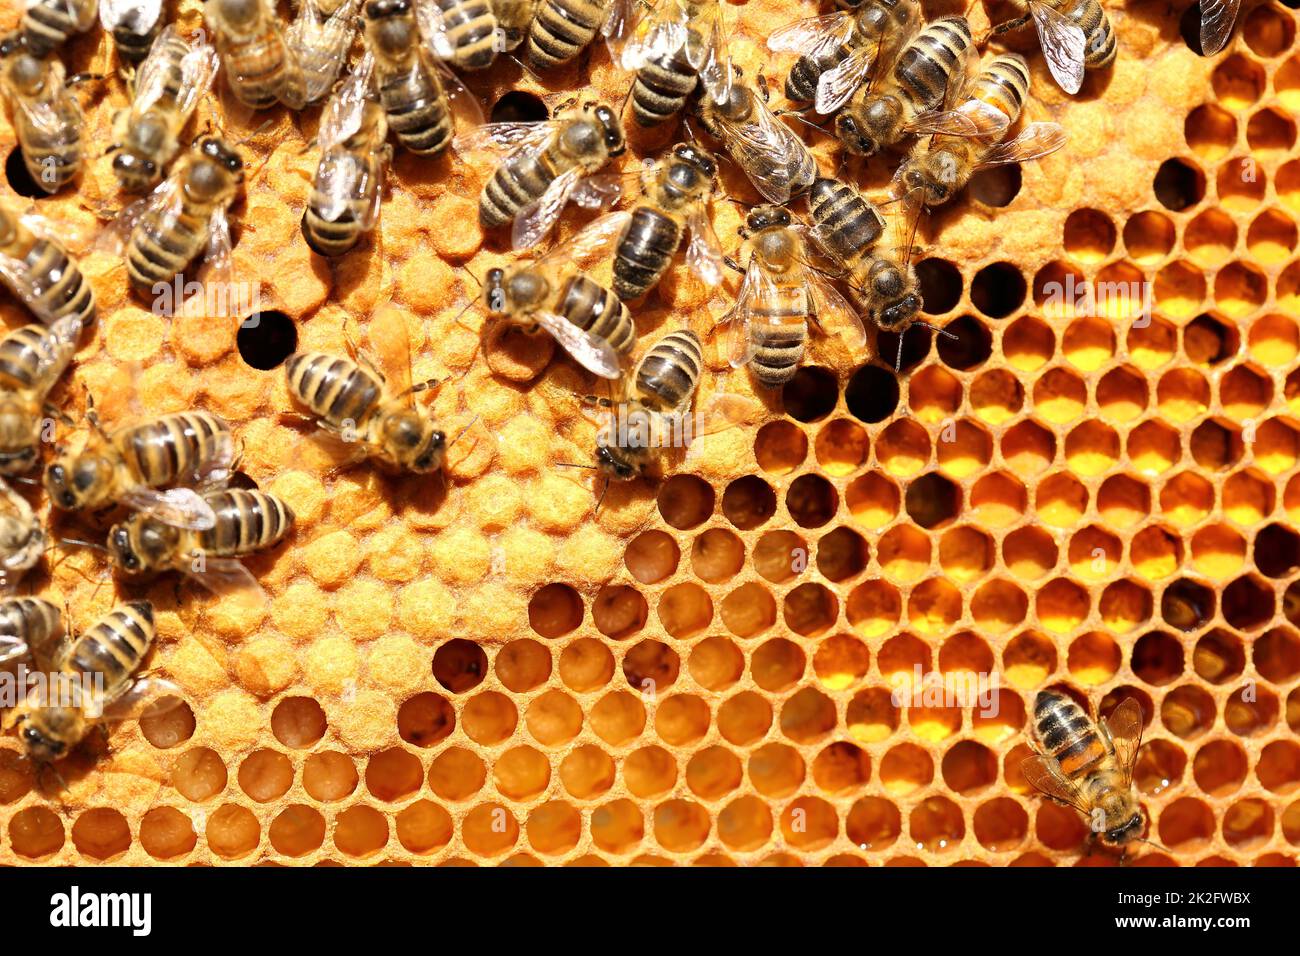 some busy honey bees on a beeswax Stock Photo